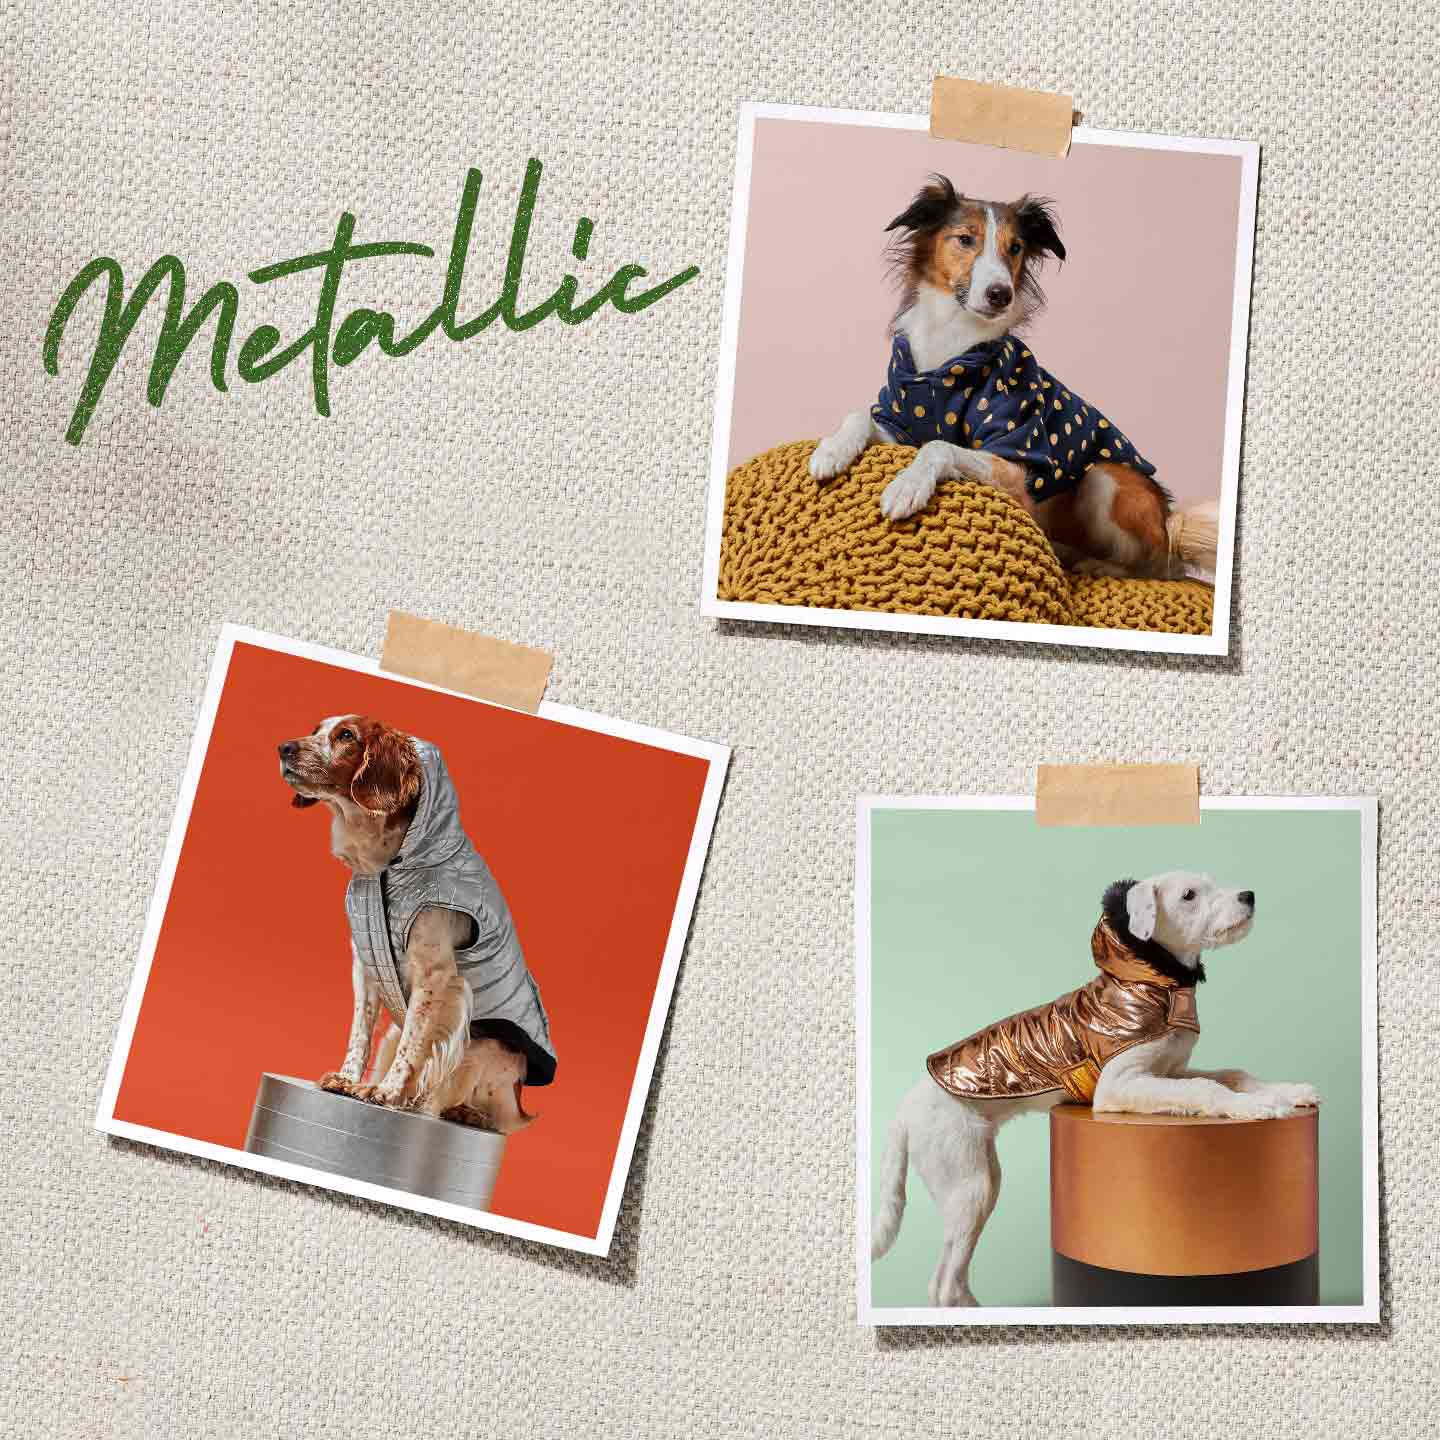 fall winter fashion for dogs - metallic trend